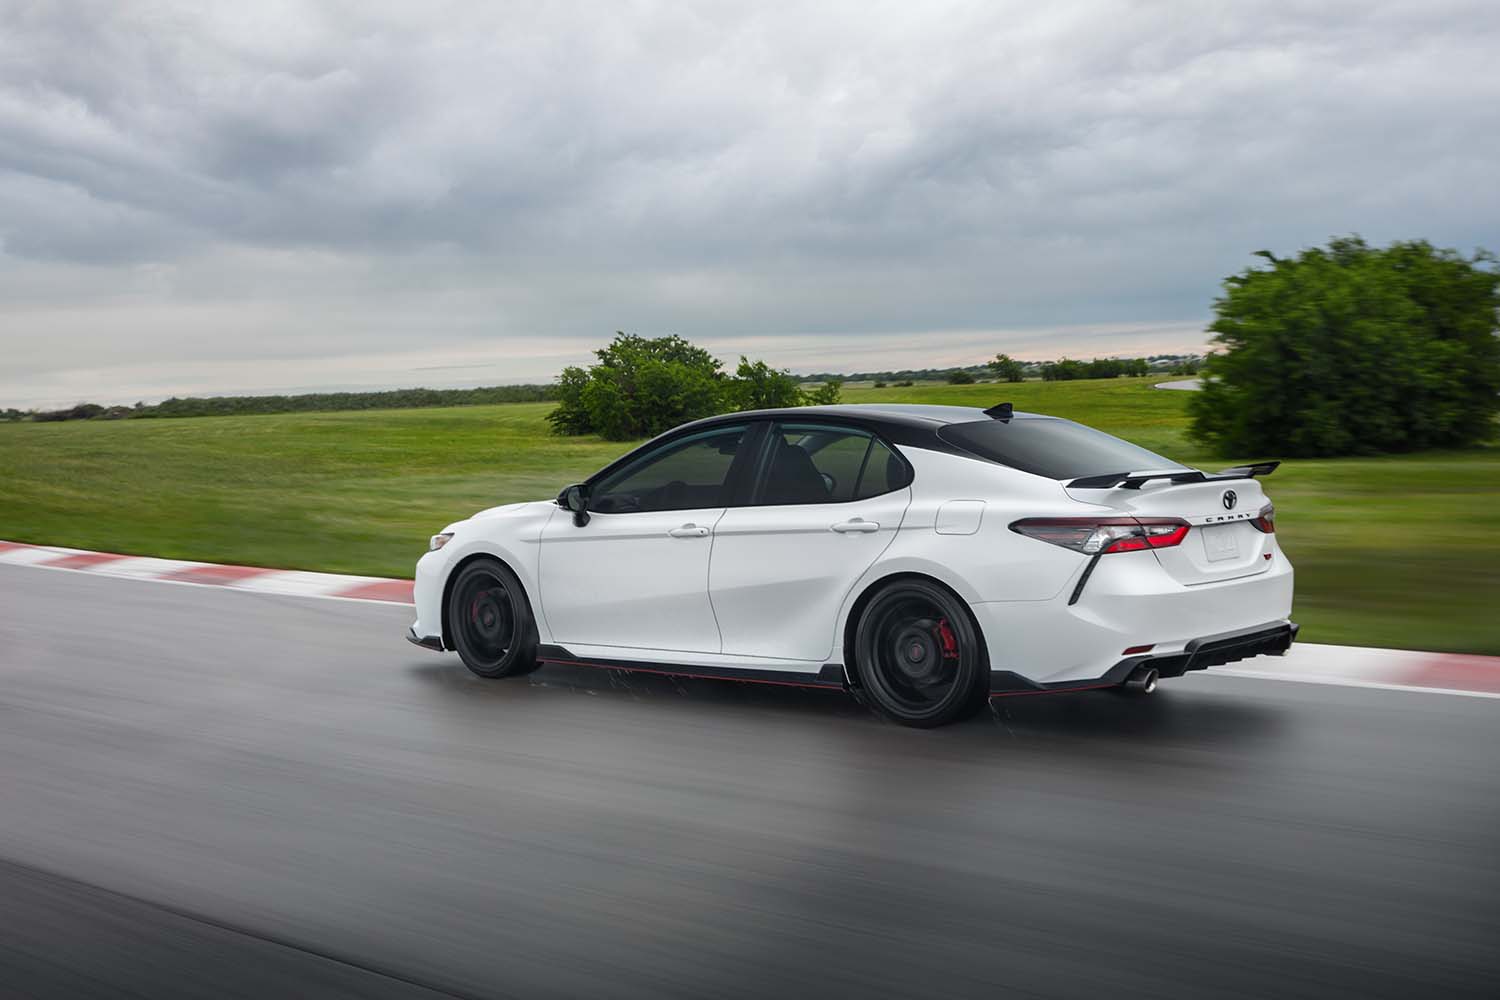 The All-New 2022 Toyota Camry at Bobby Rahal Toyota in Mechanicsburg, PA | White 2022 Toyota Camry driving on the race track